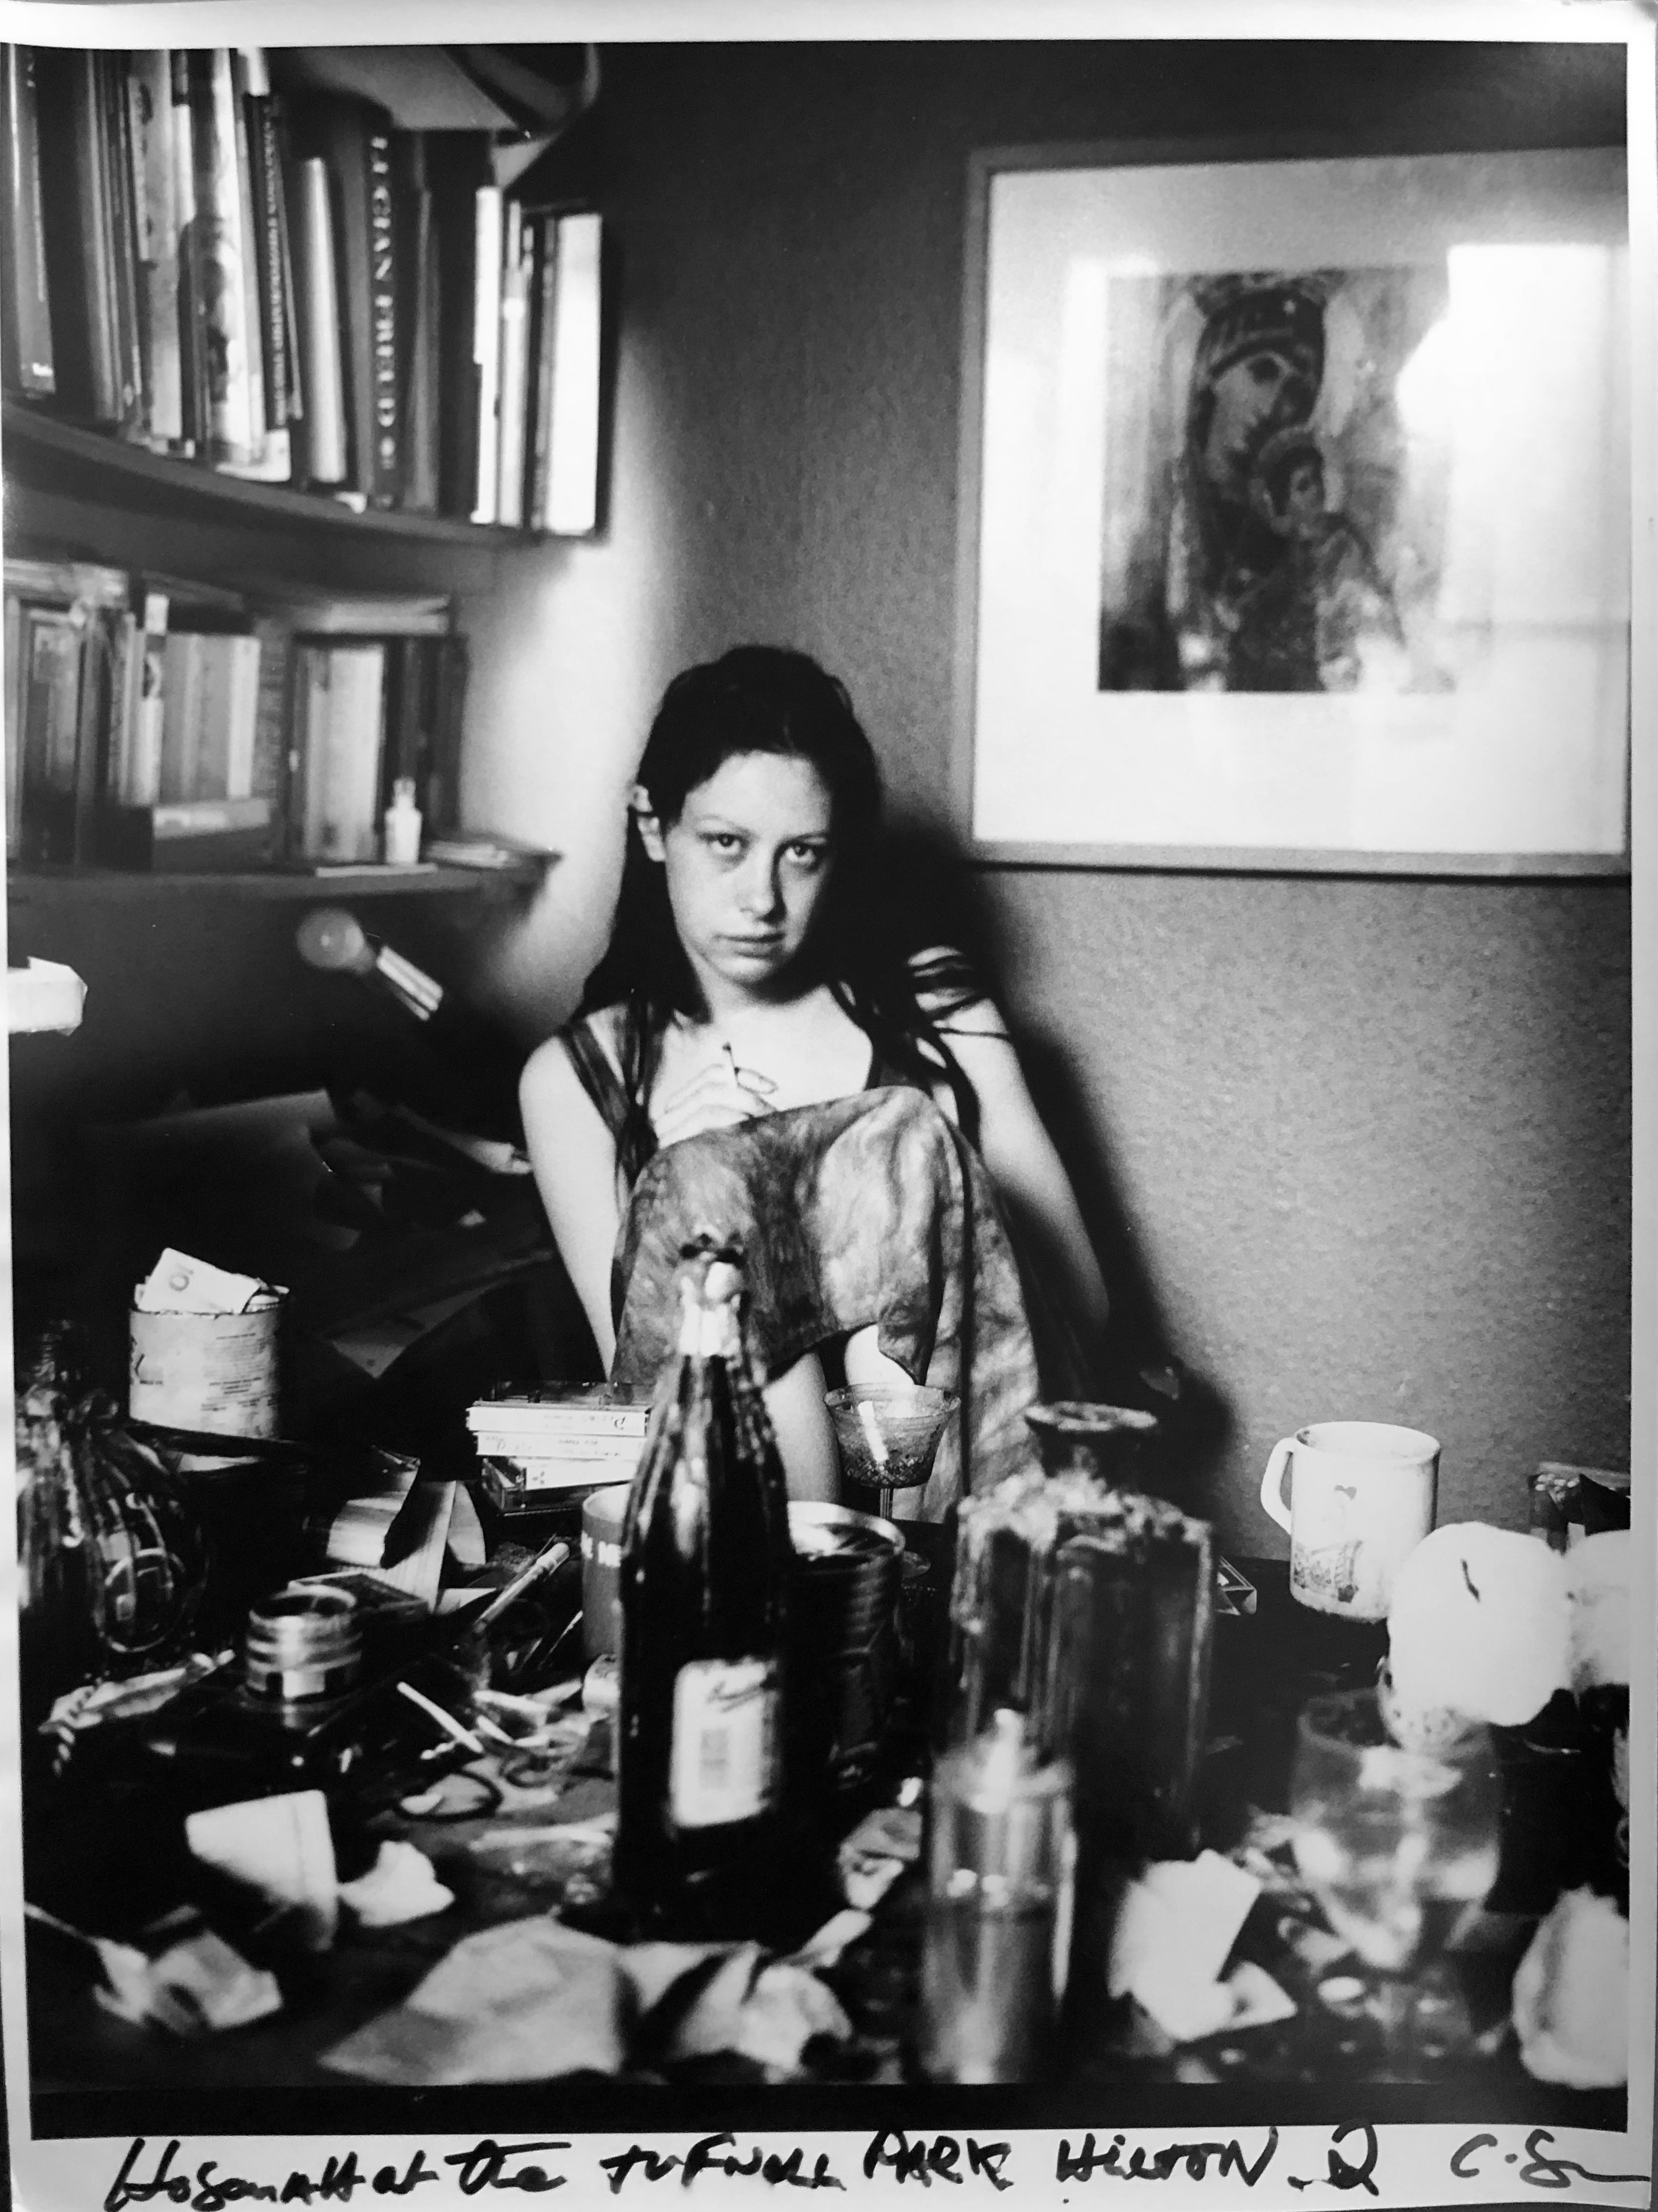 black-and-white image of a woman sitting at a table littered with bottles, glasses and cameras